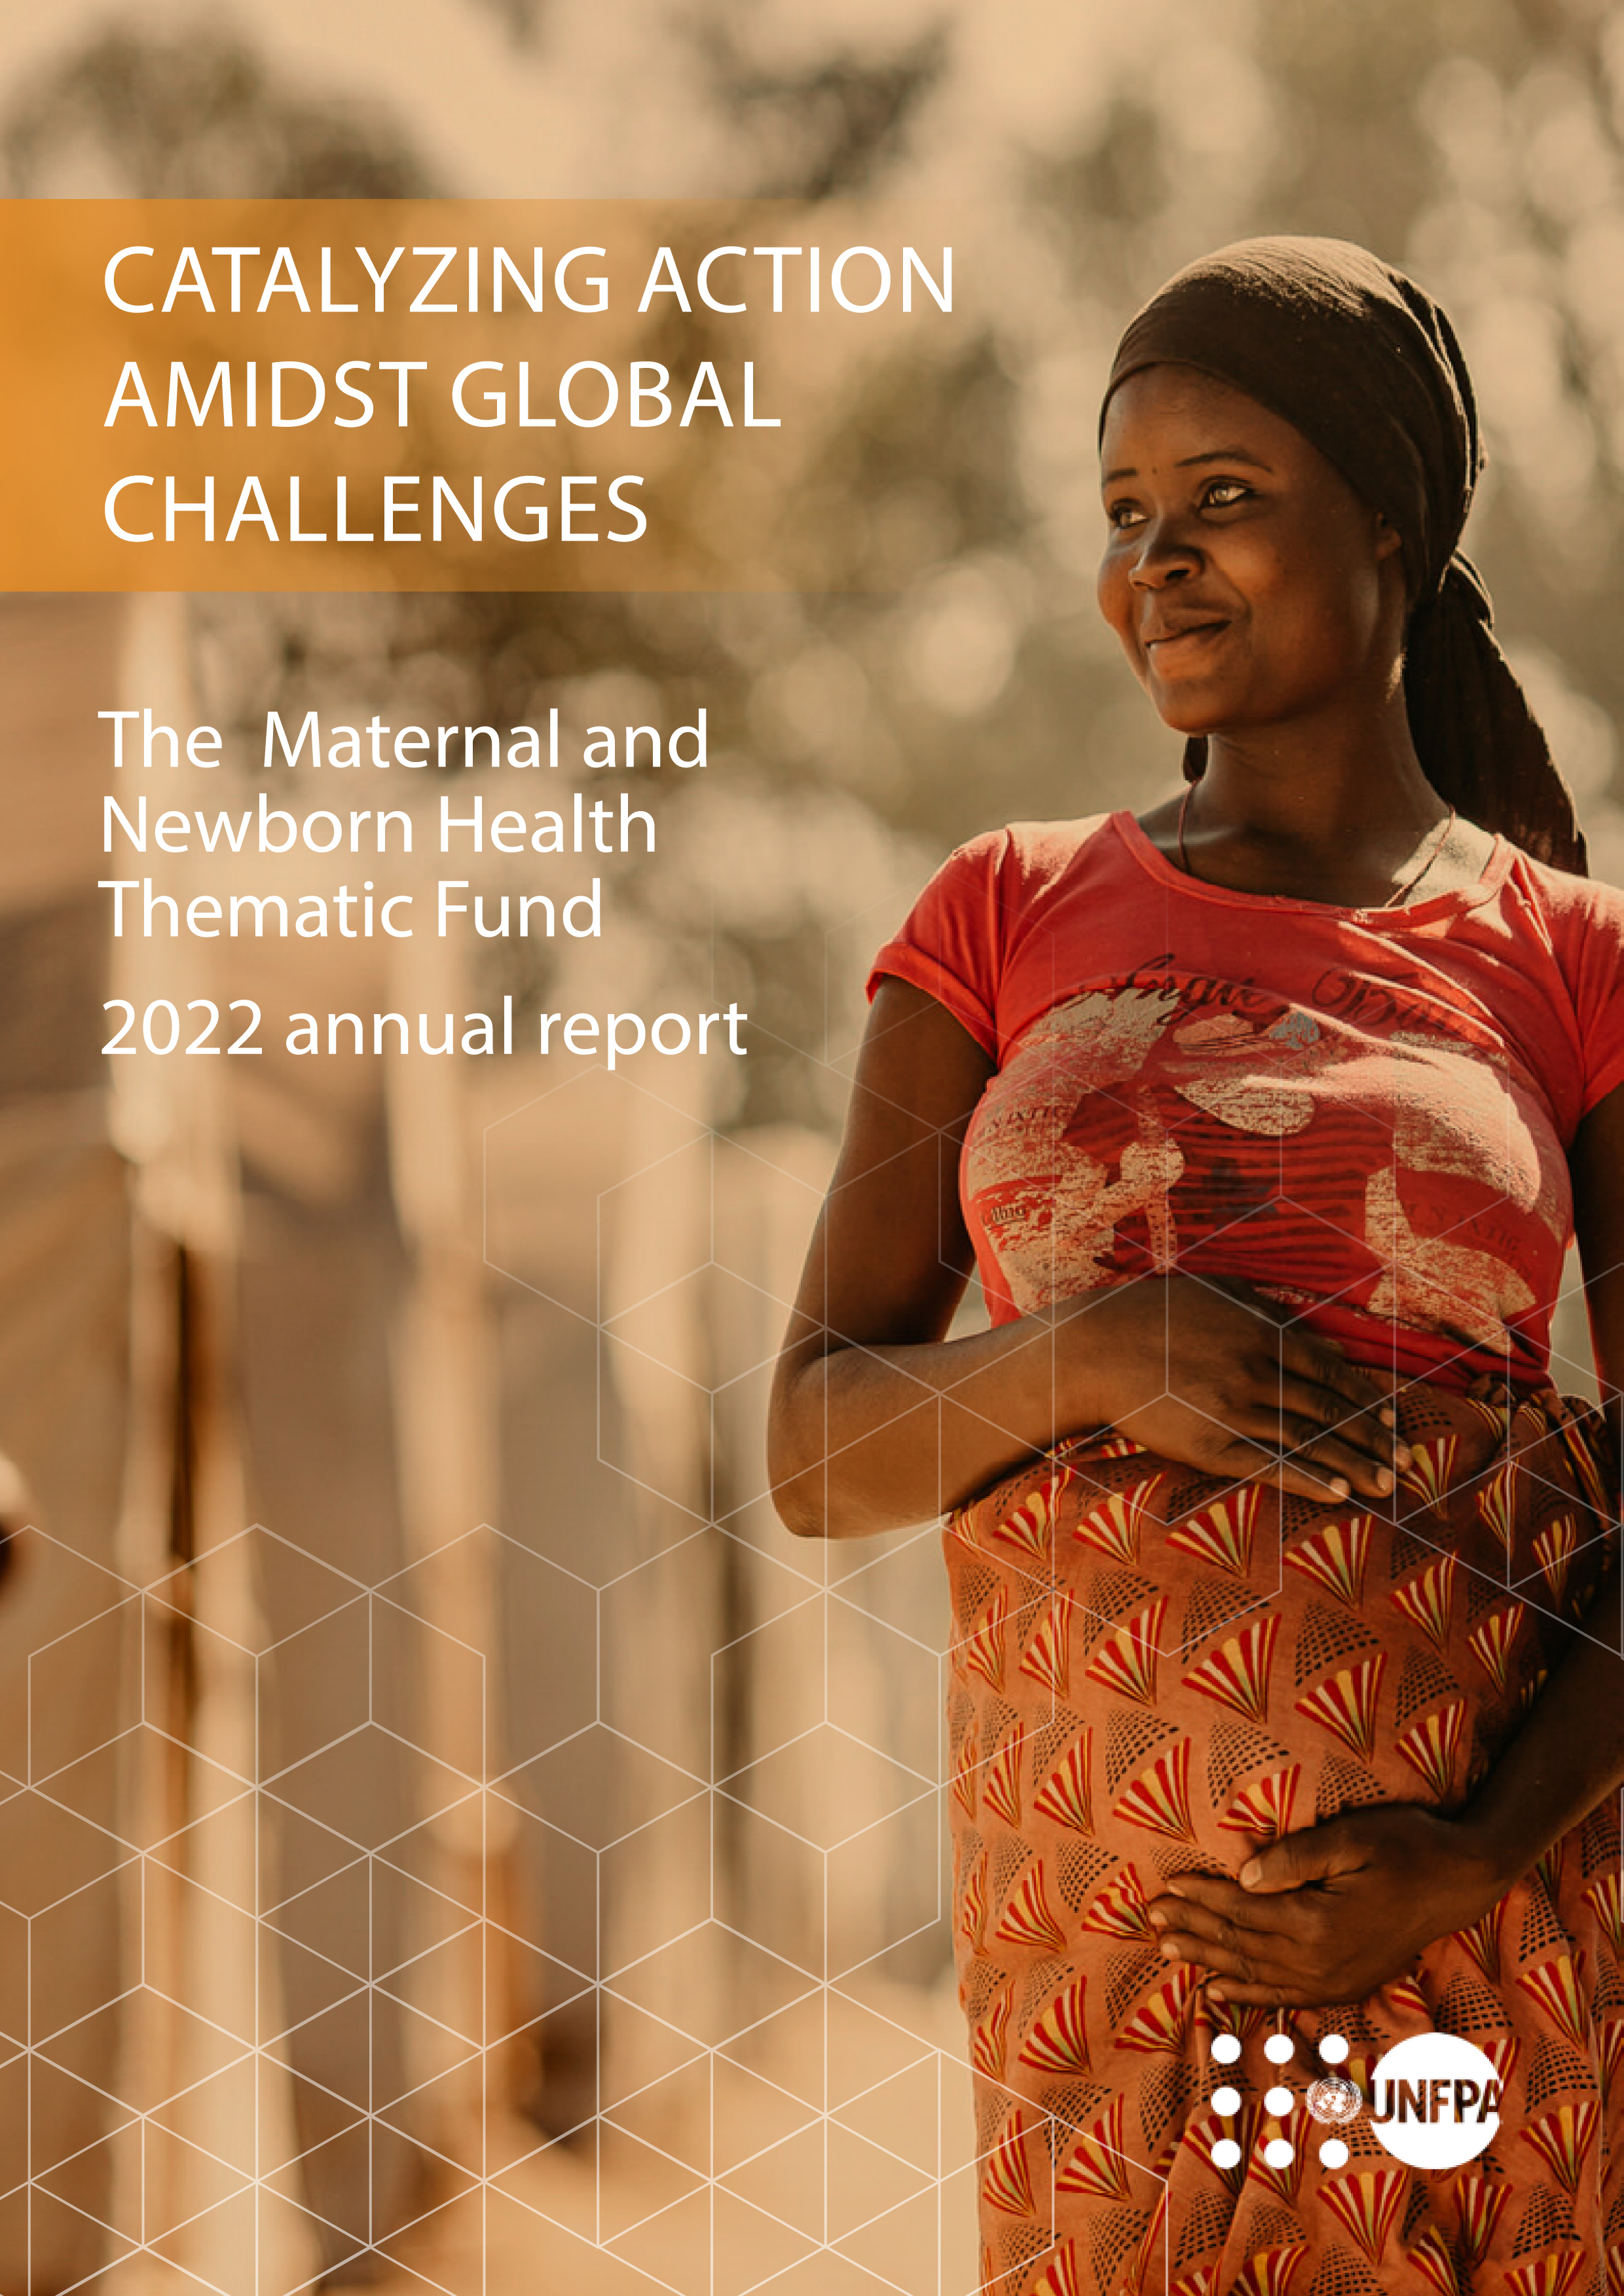 The Maternal and Newborn Health Thematic Fund: 2022 Annual Report